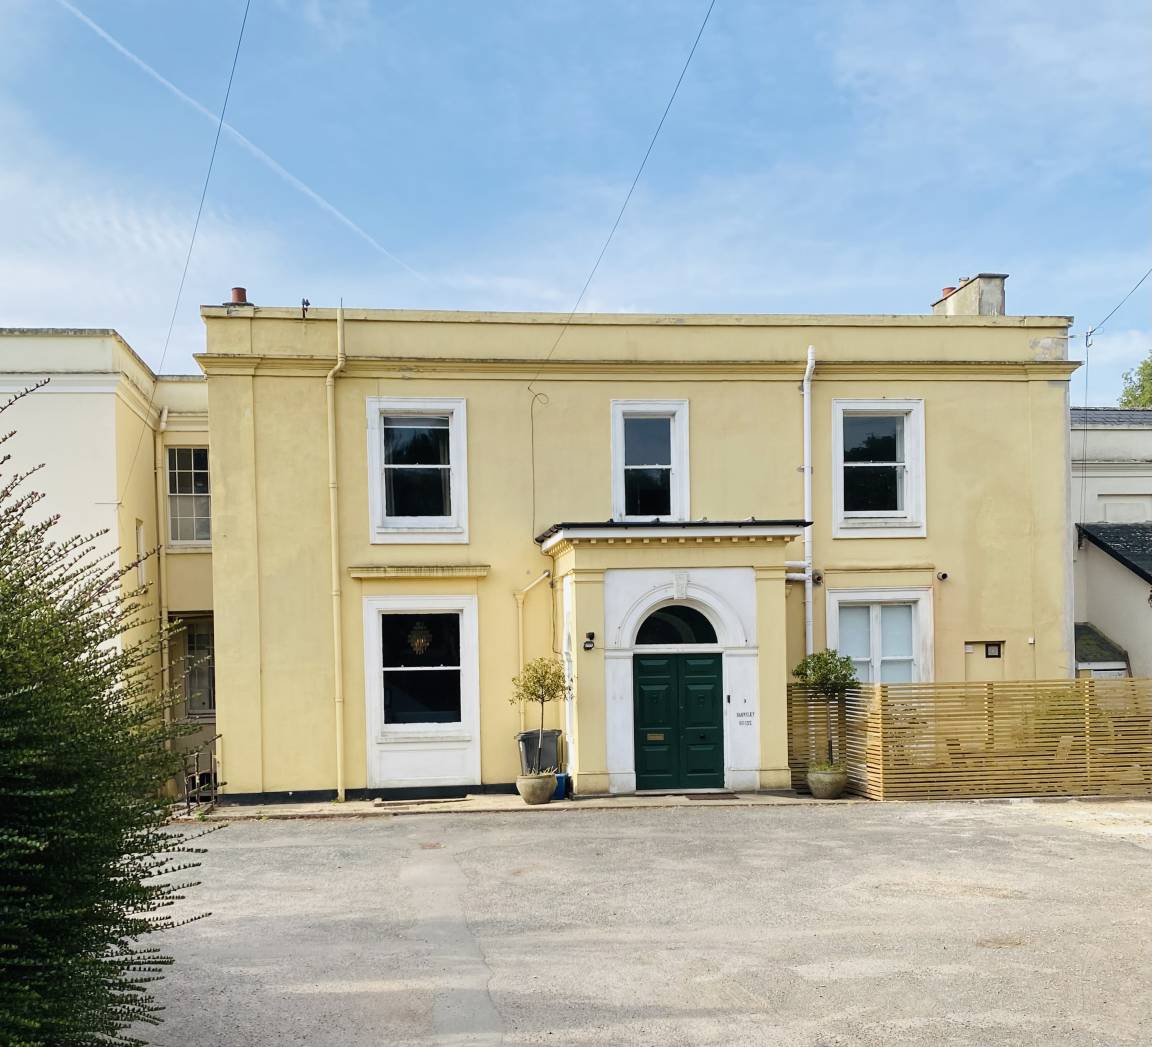 160 M² Cottage ∙ 5 Bedrooms ∙ 13 Guests - Teignmouth